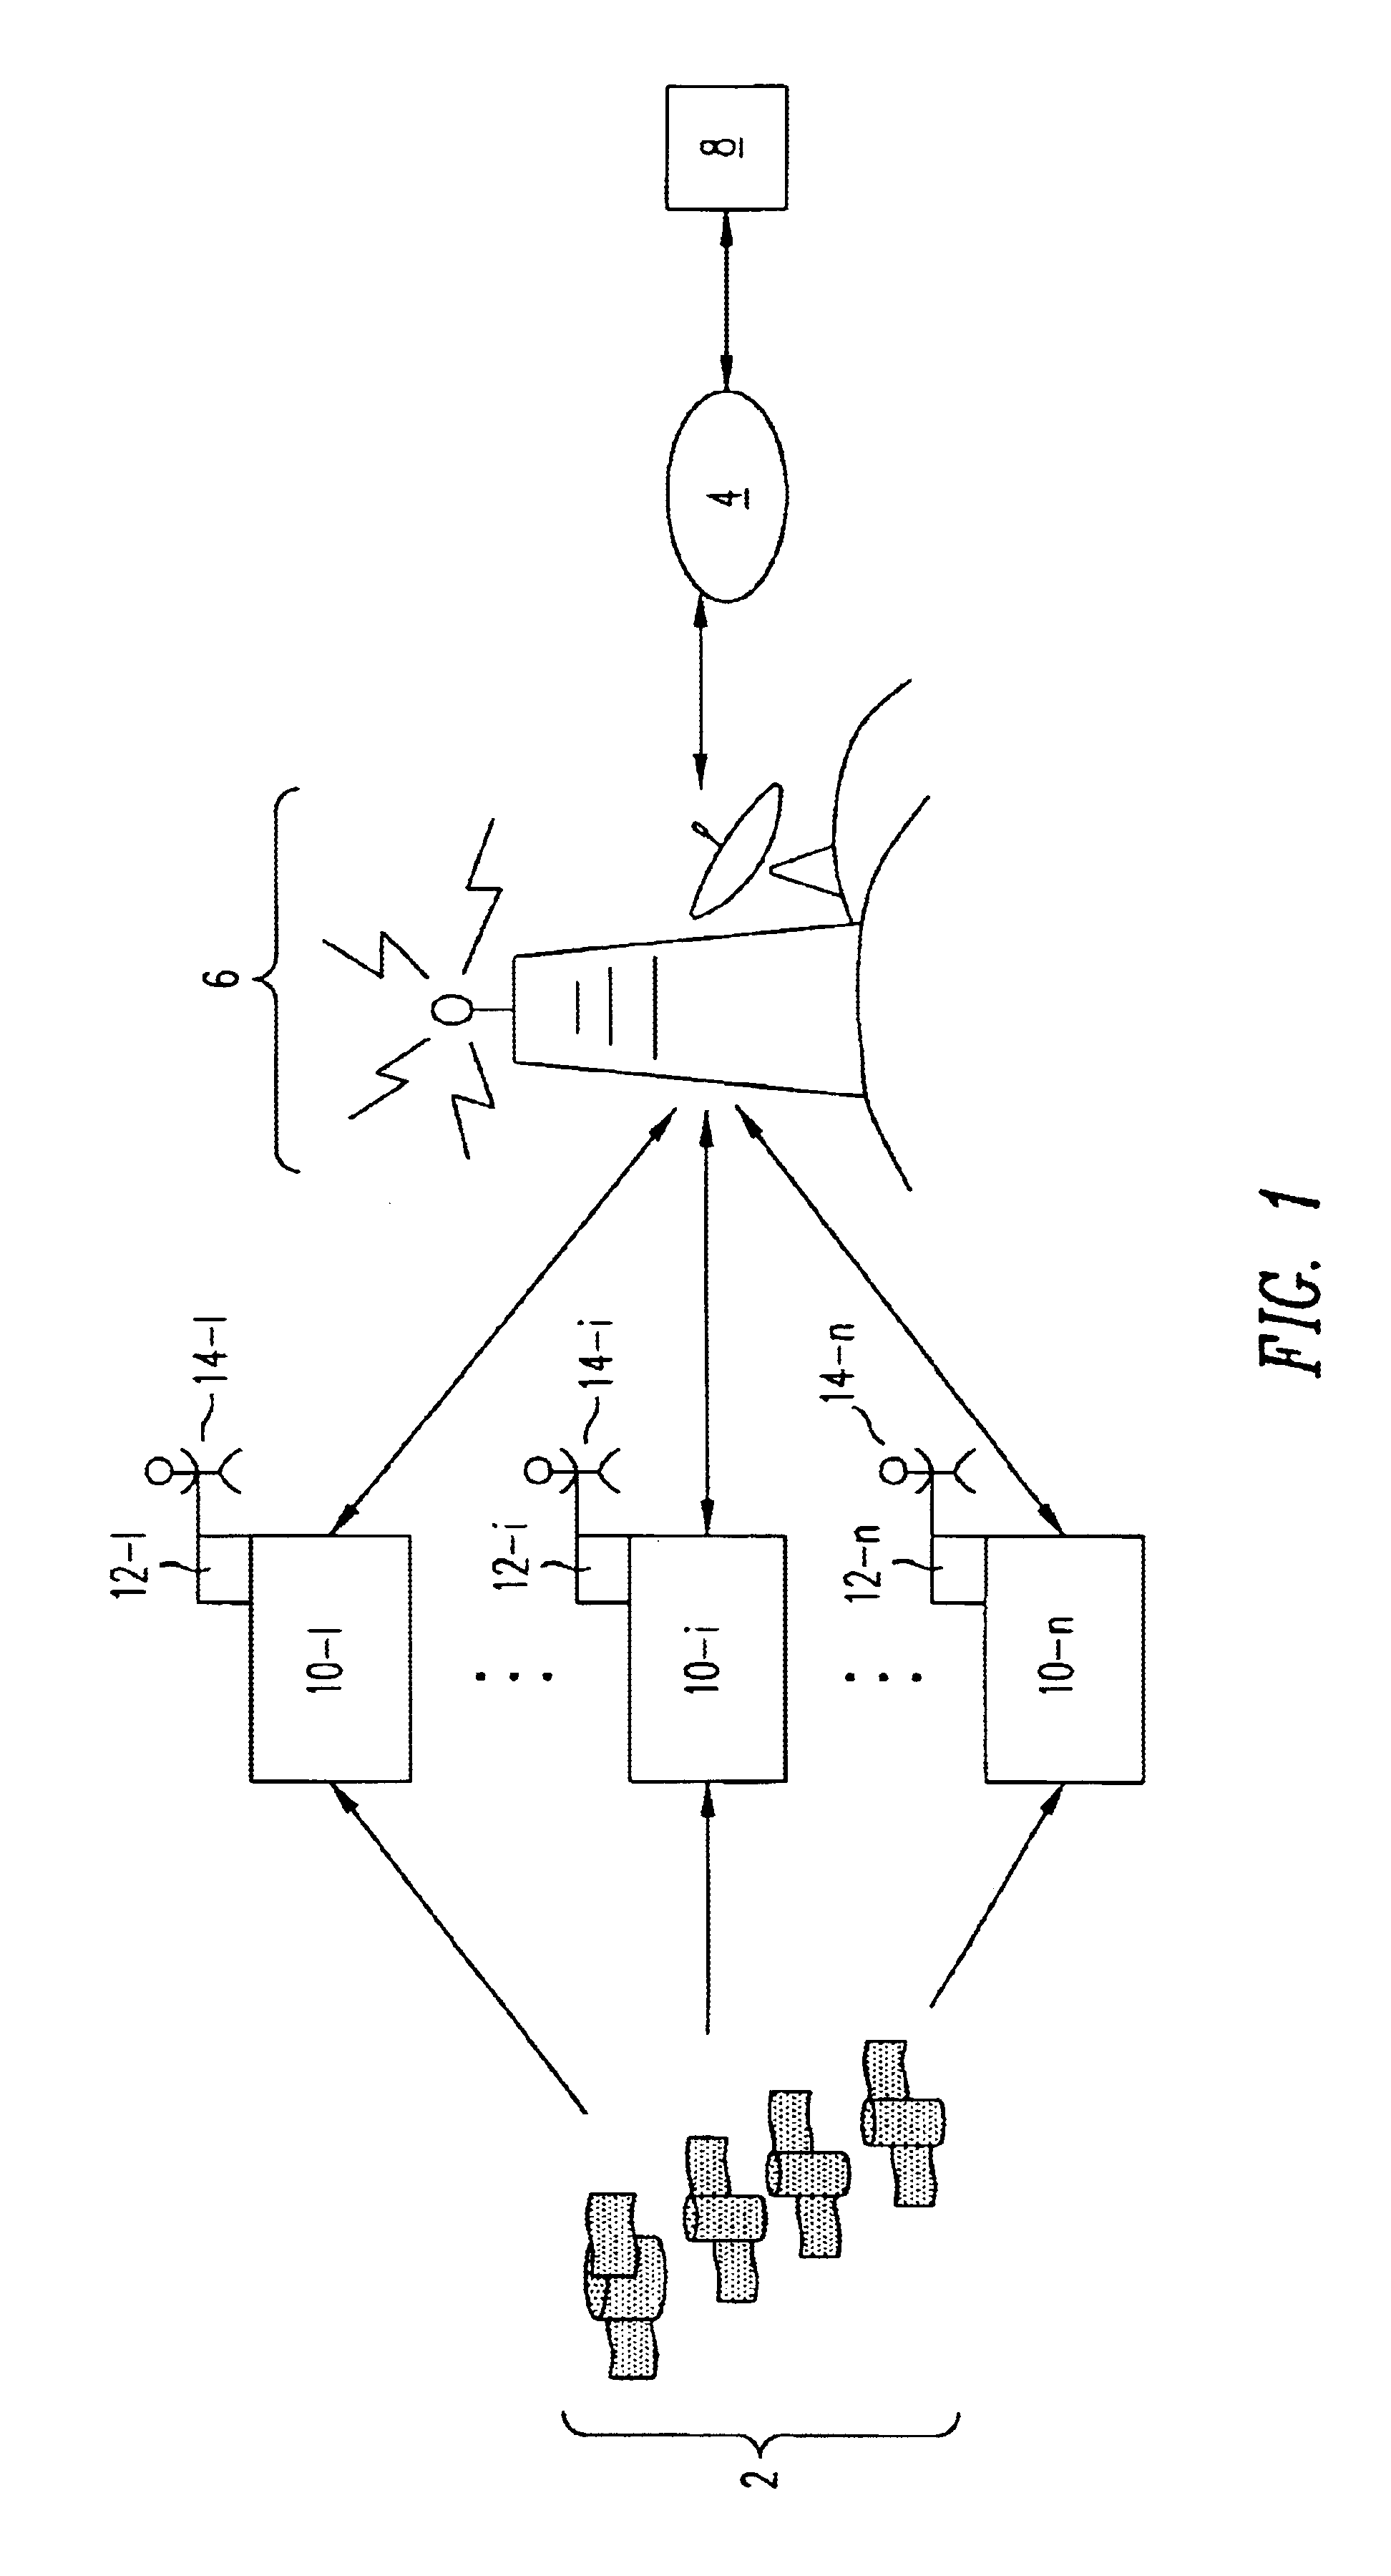 Method and system for a plurality of mobile units to locate one another